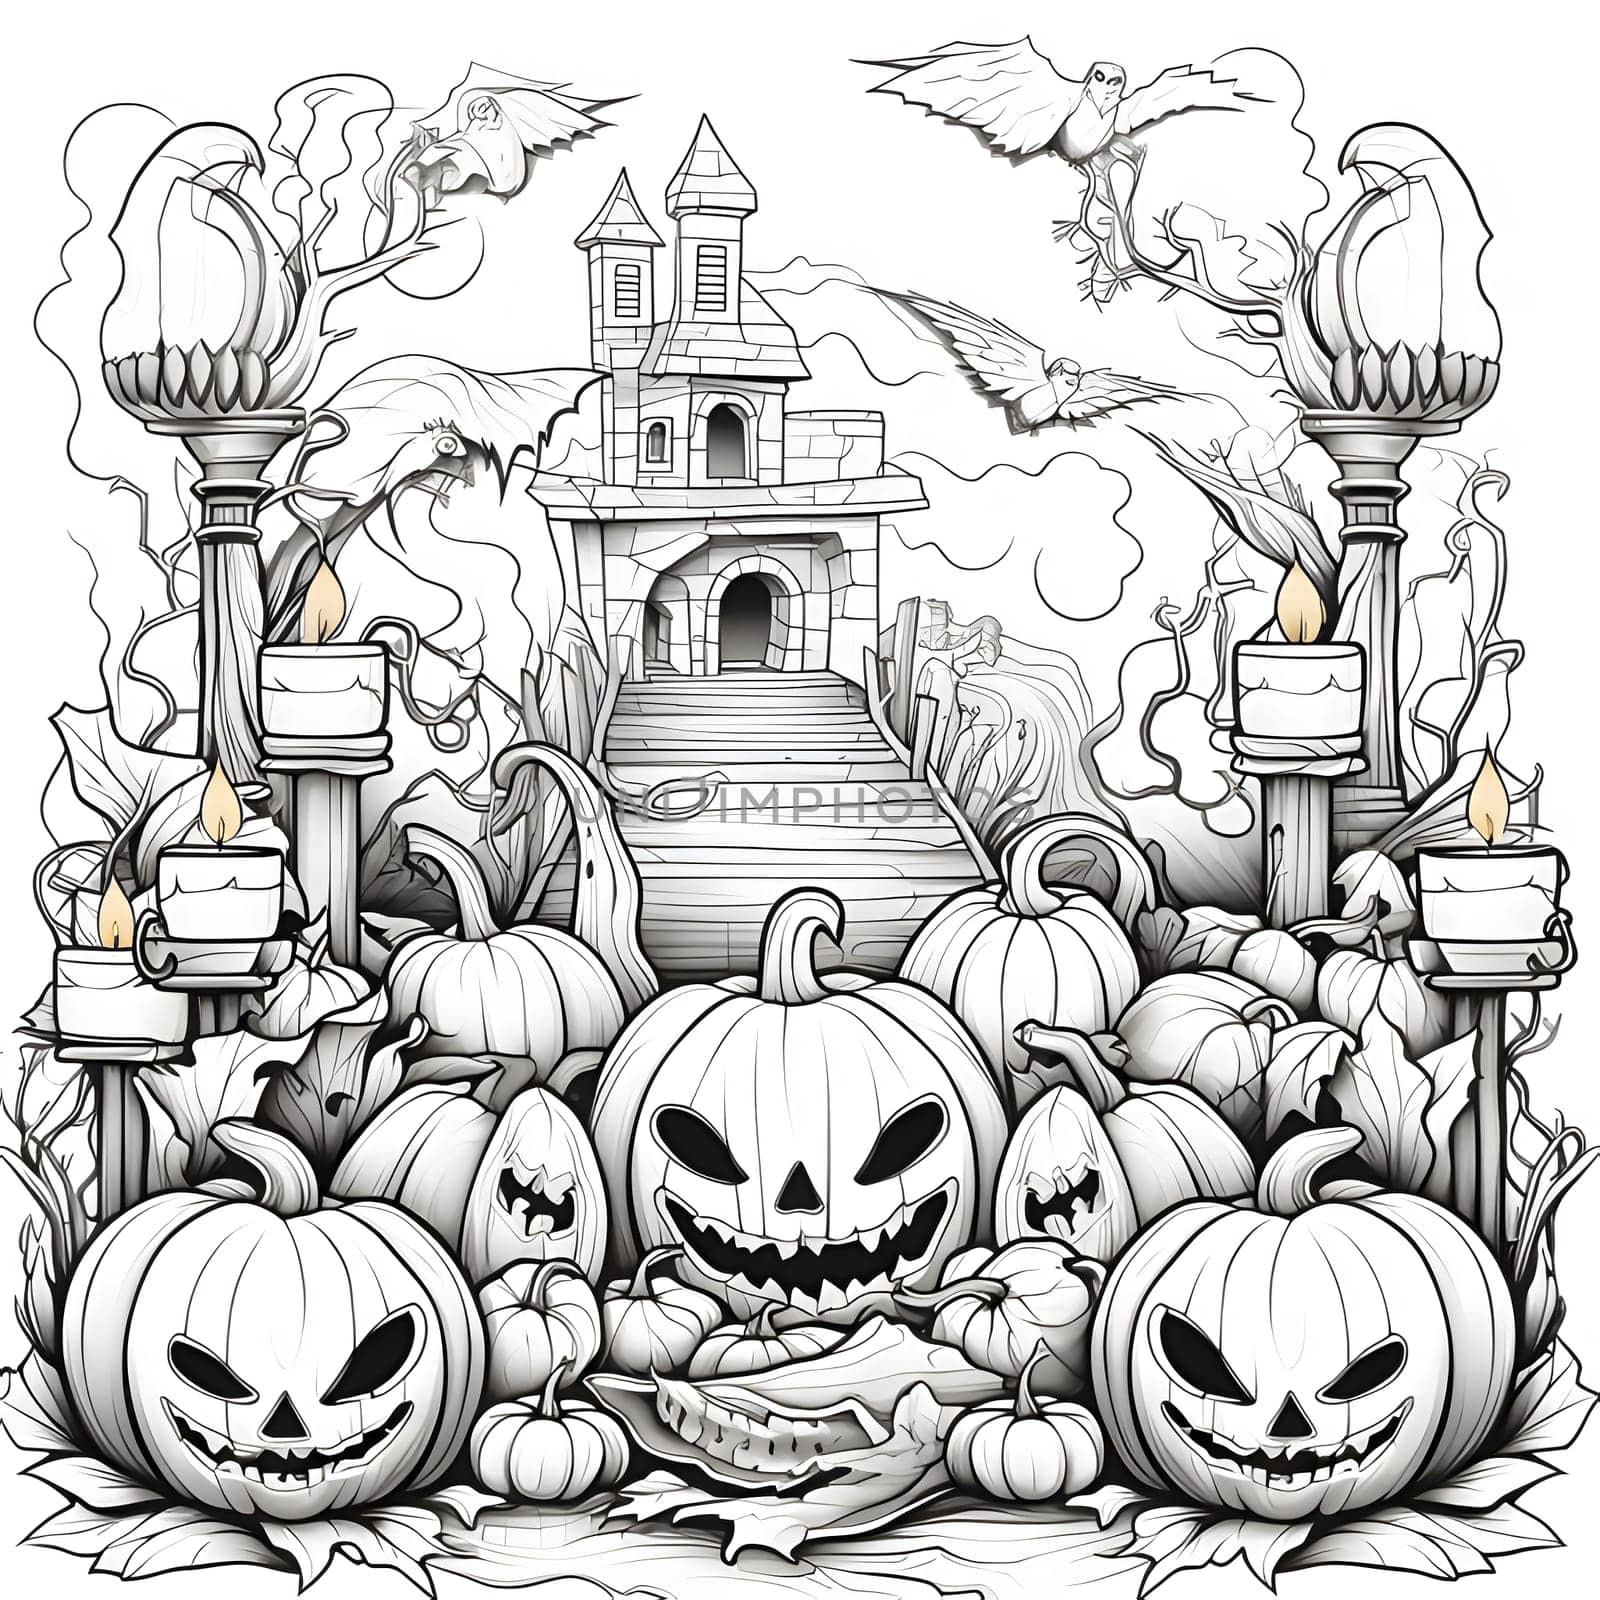 Road to the castle, flying birds and ominous jack-o-lantern pumpkins and lit candles, Halloween black and white picture coloring book. Atmosphere of darkness and fear.